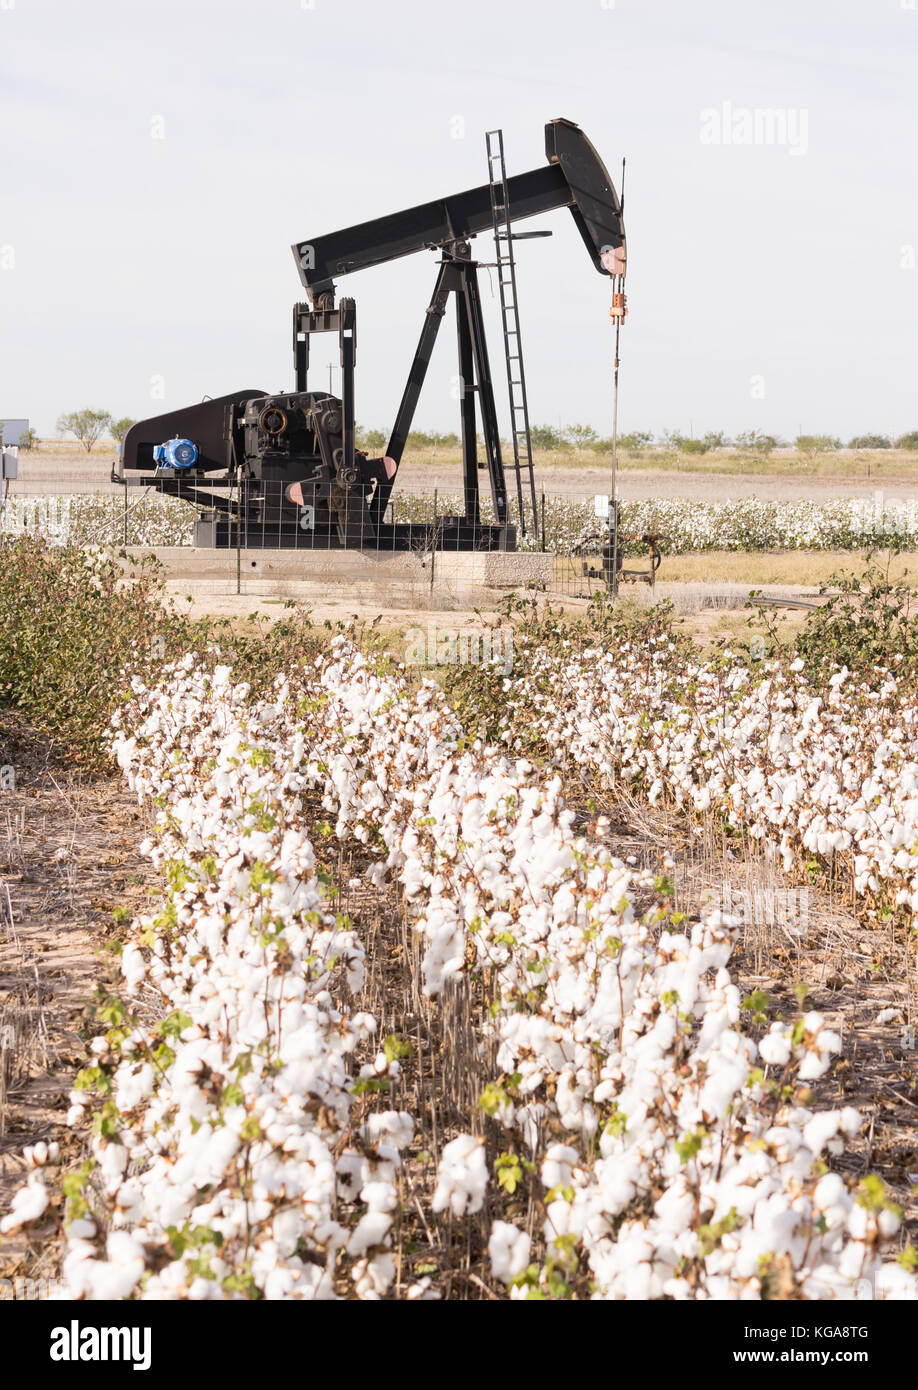 Oil production in a mature cotton field Stock Photo